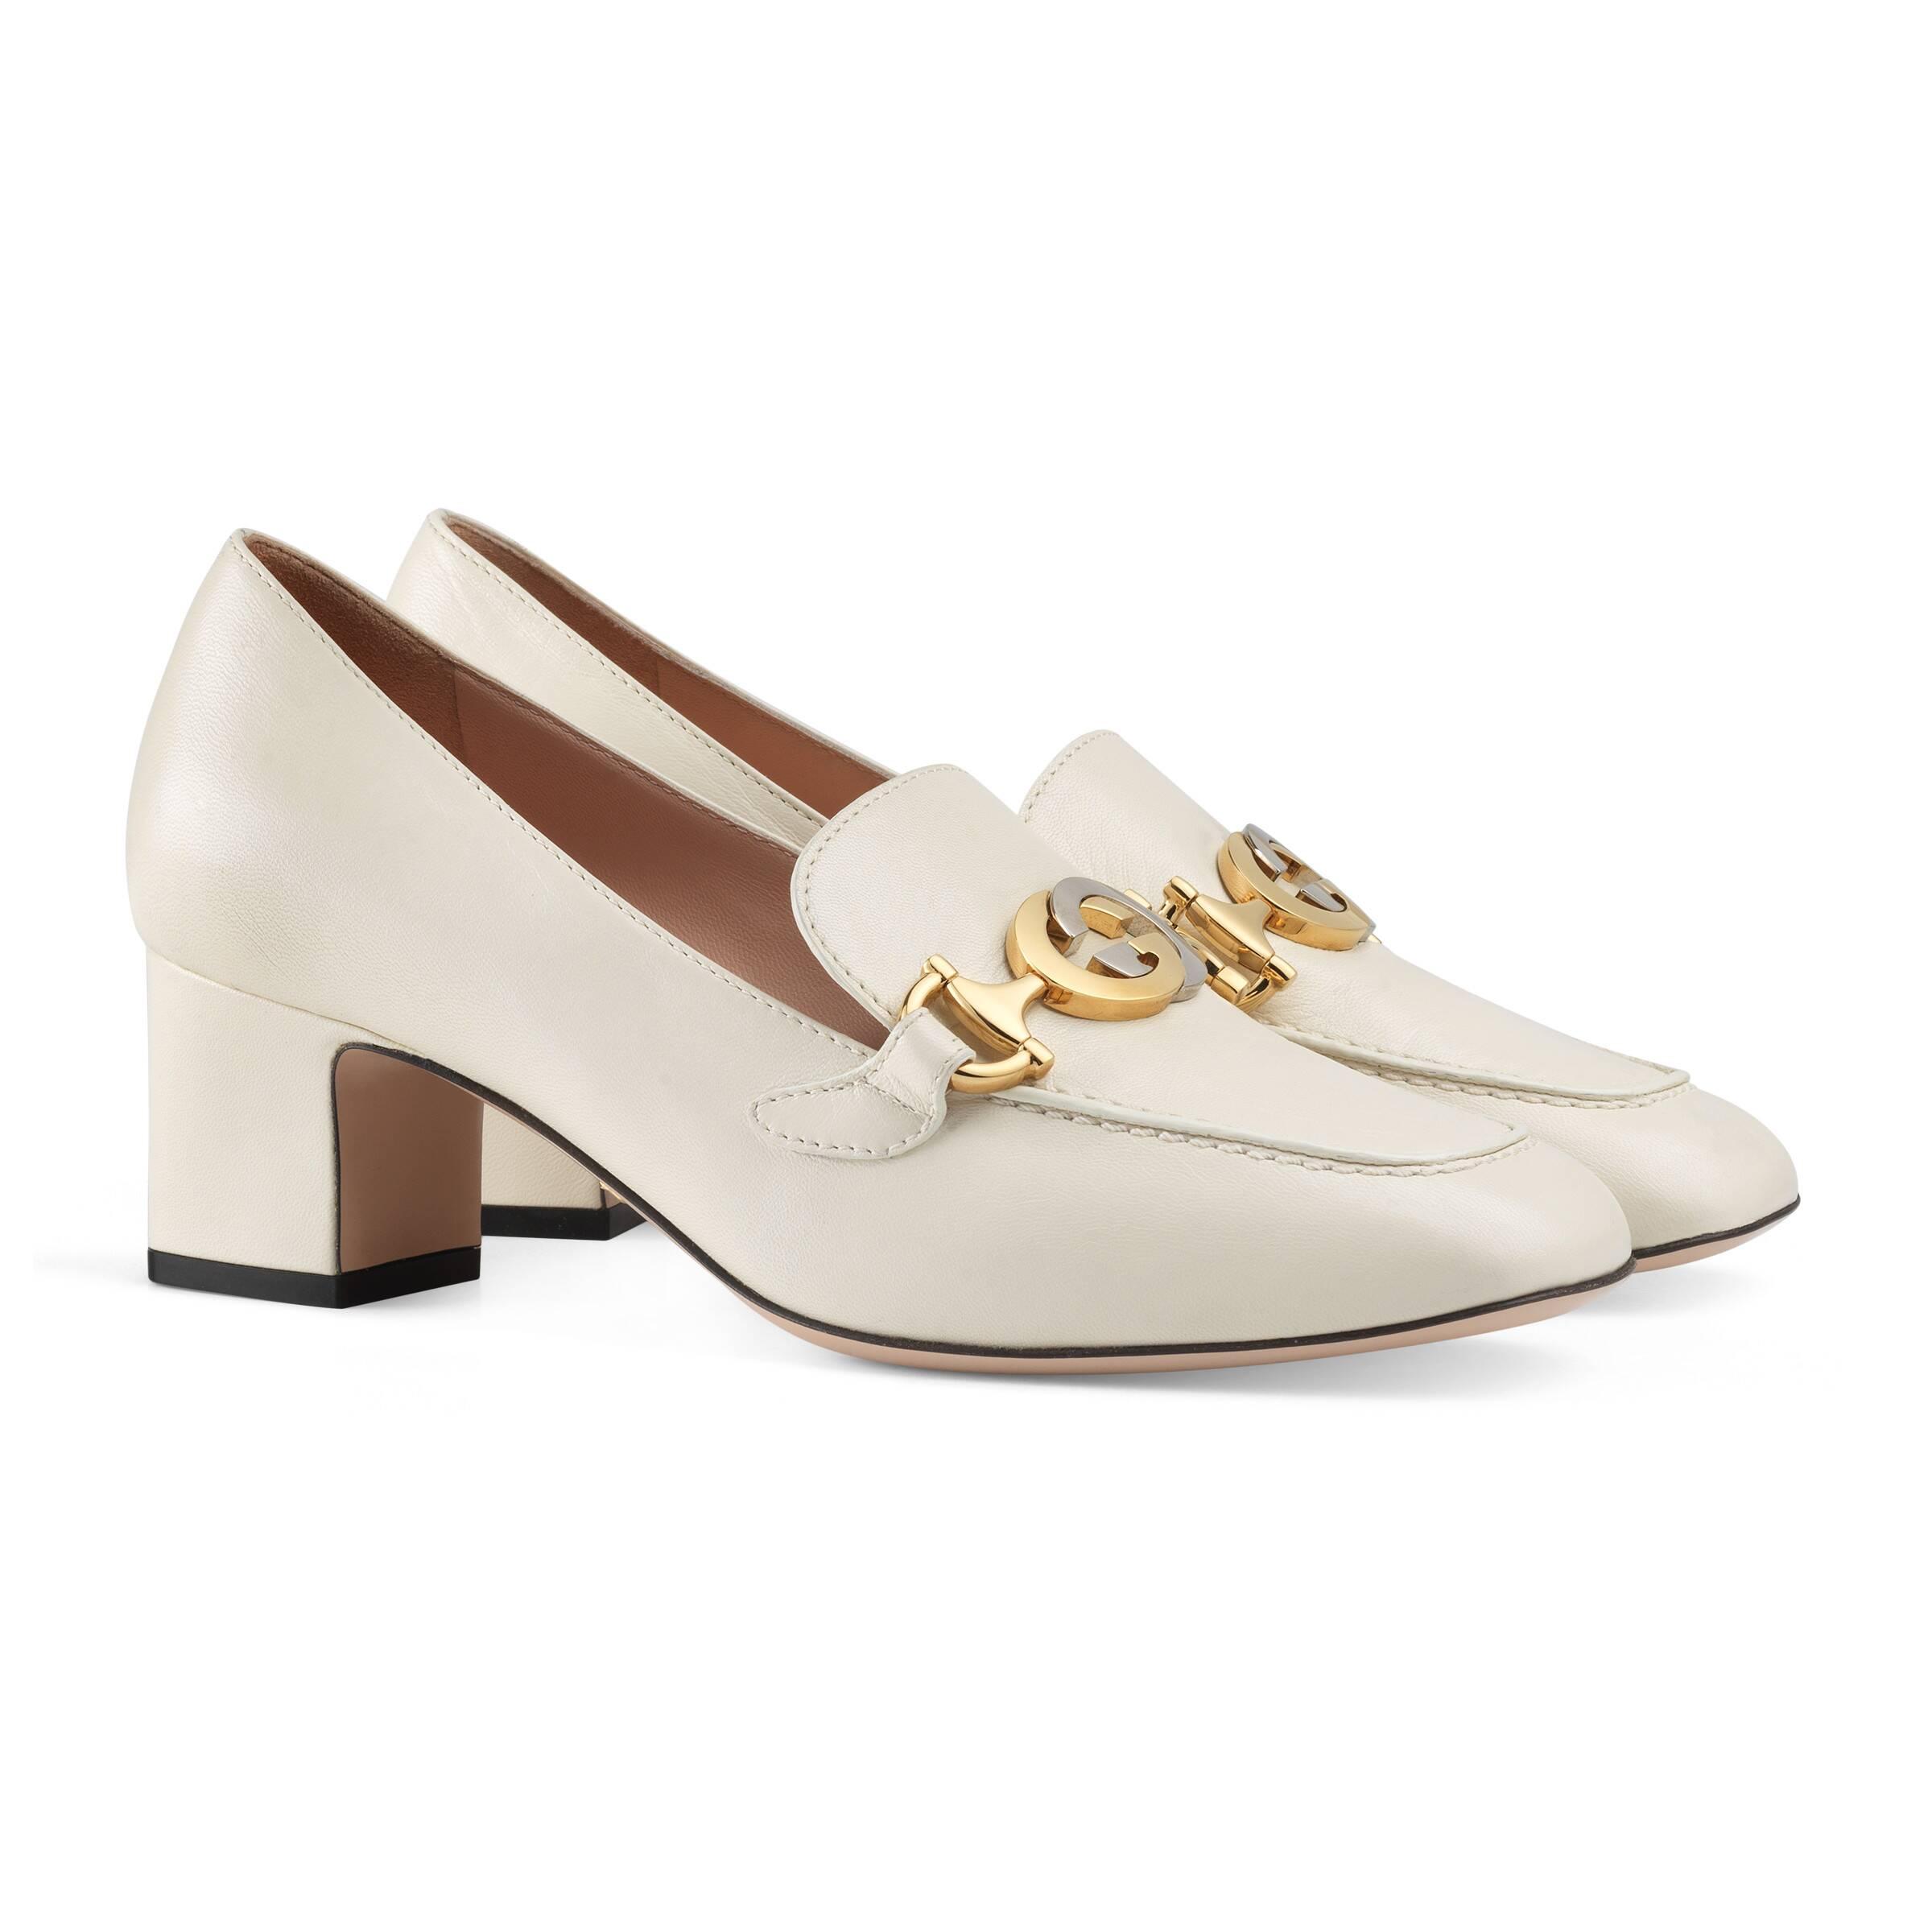 Gucci Zumi Leather Mid-heel Loafer in White Leather (White) - Lyst